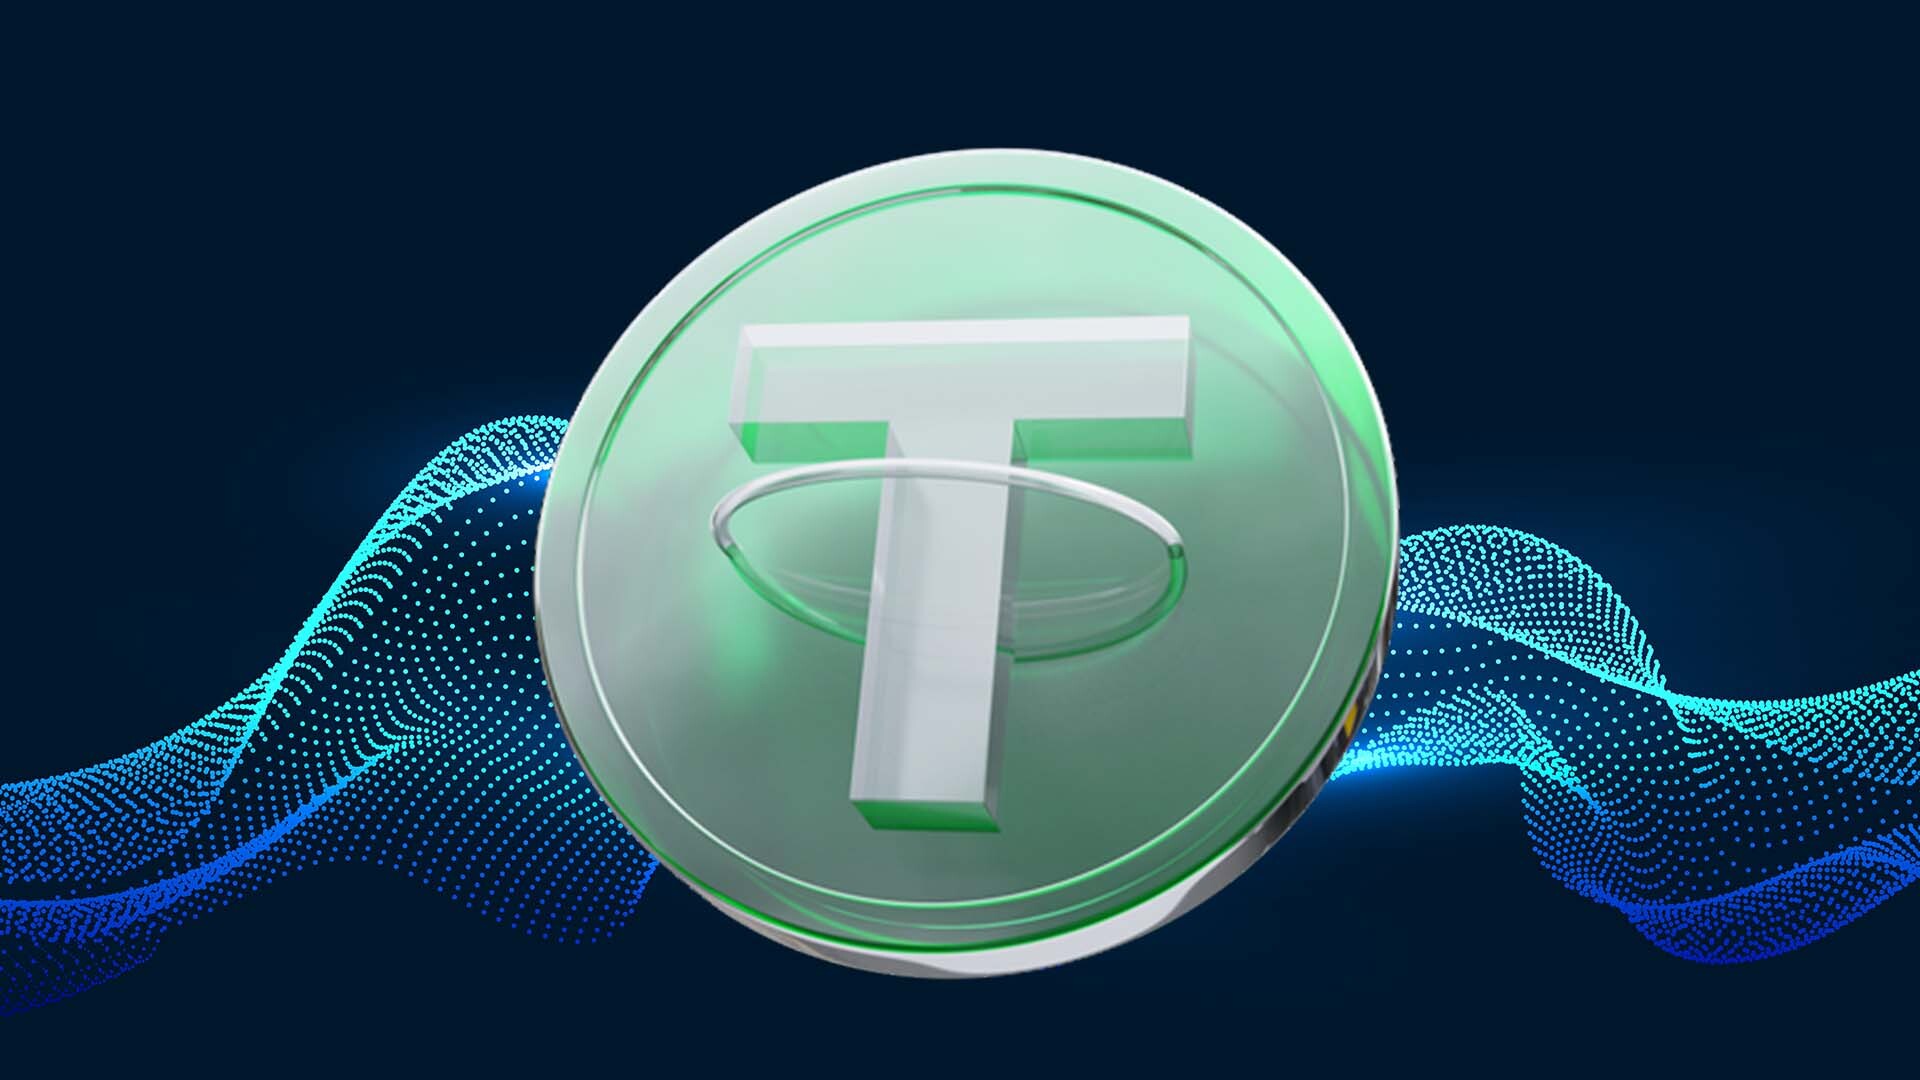 What Makes Tether The King Of Stablecoin?